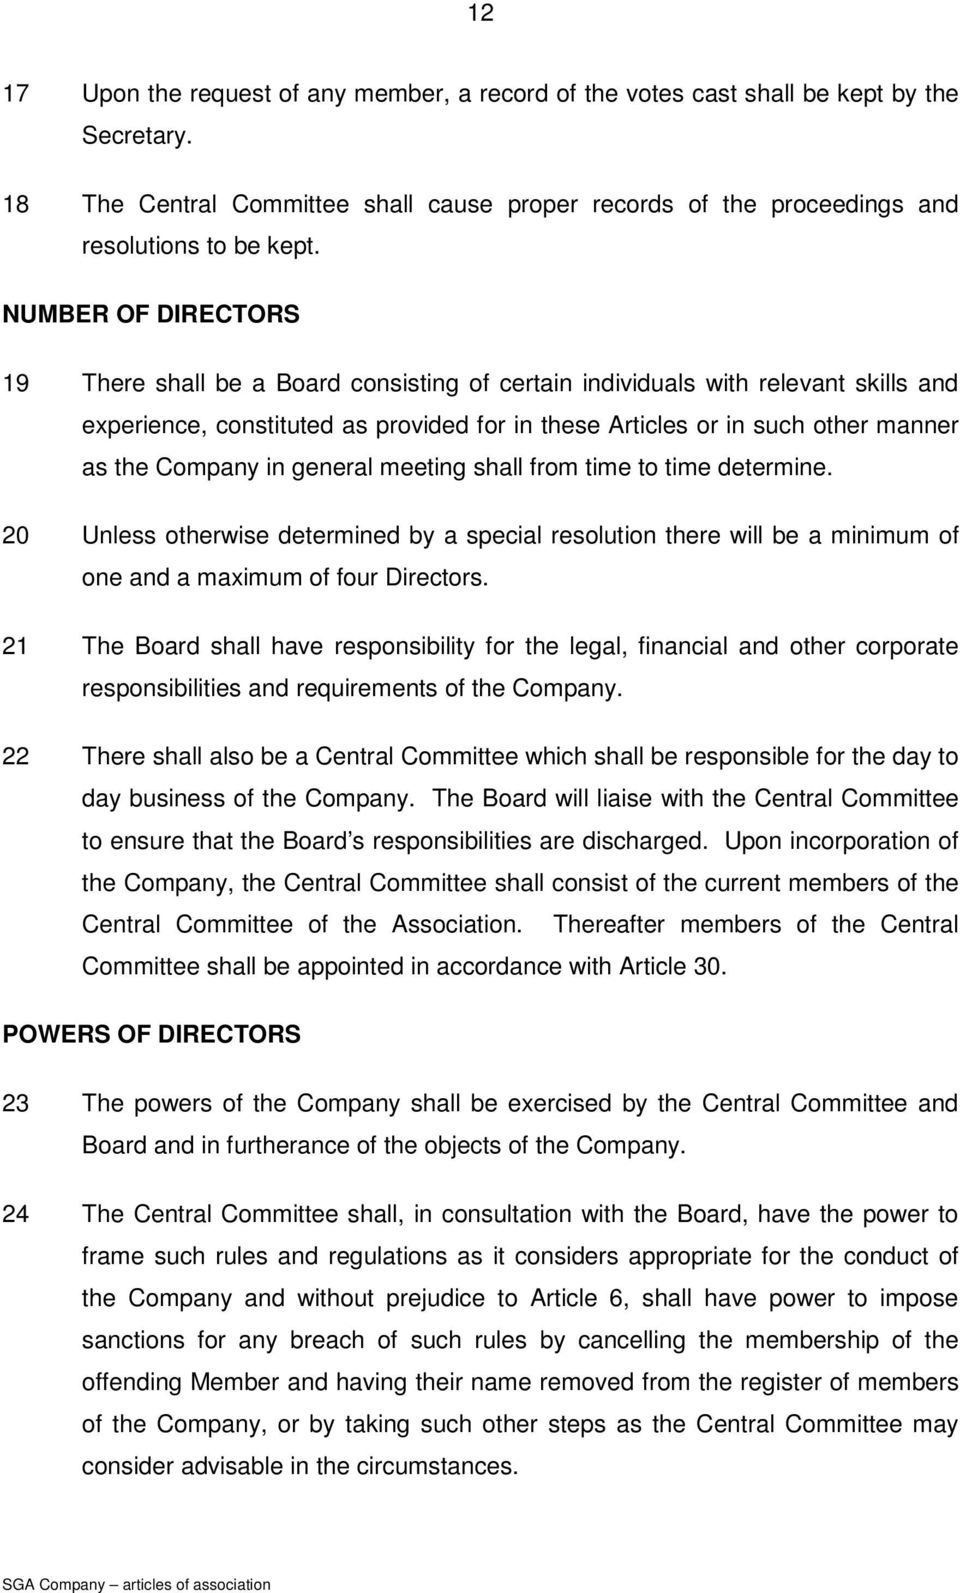 Company in general meeting shall from time to time determine. 20 Unless otherwise determined by a special resolution there will be a minimum of one and a maximum of four Directors.